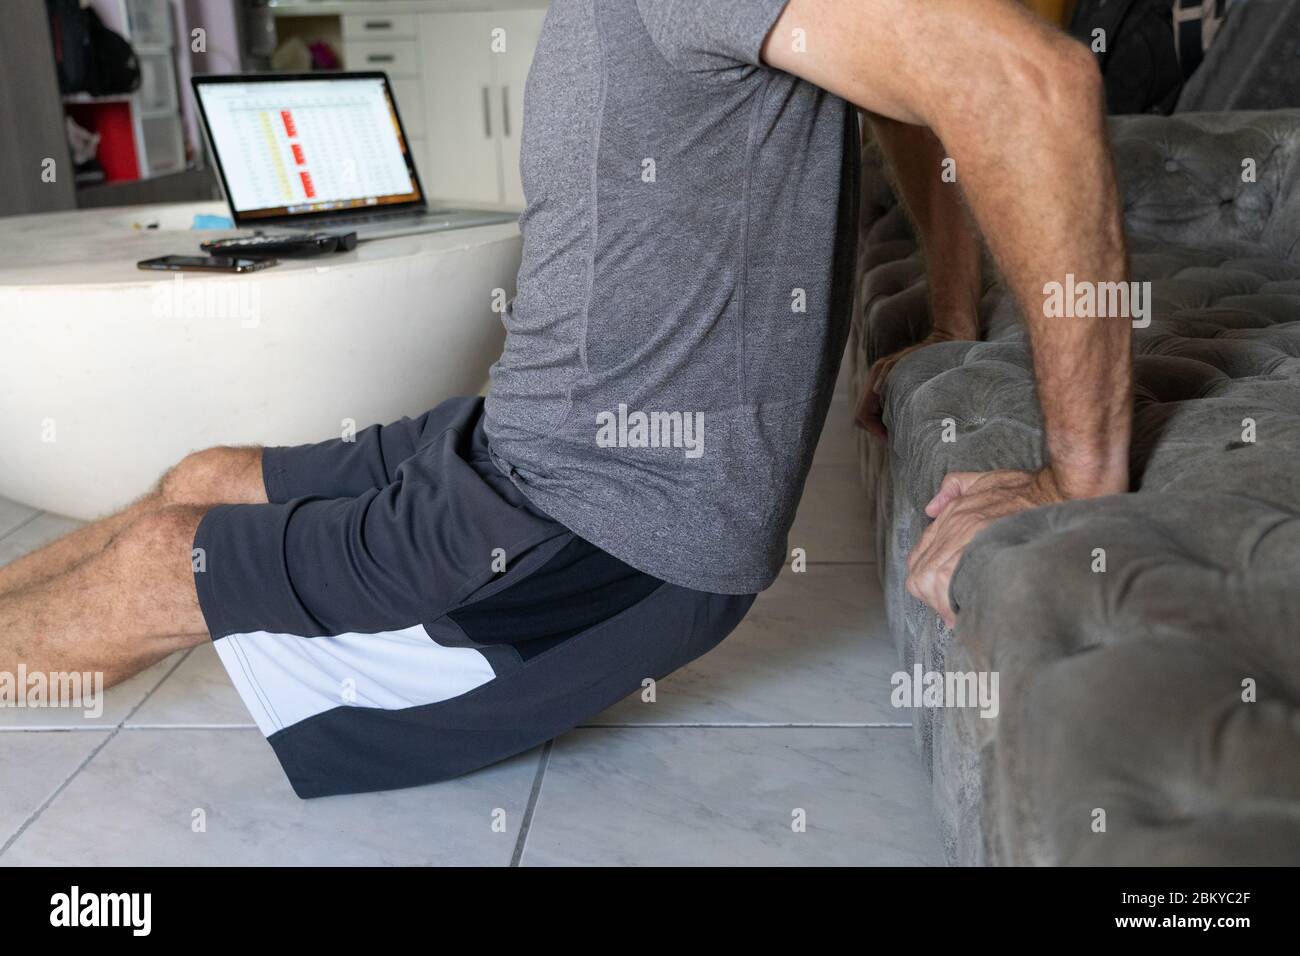 A man undertaking physical fitness exercise within an apartment during the COVID-19 Pandemic 2020.A computer in the background with the screen highlighting International infection rates and deaths from the Pandemic. Stock Photo